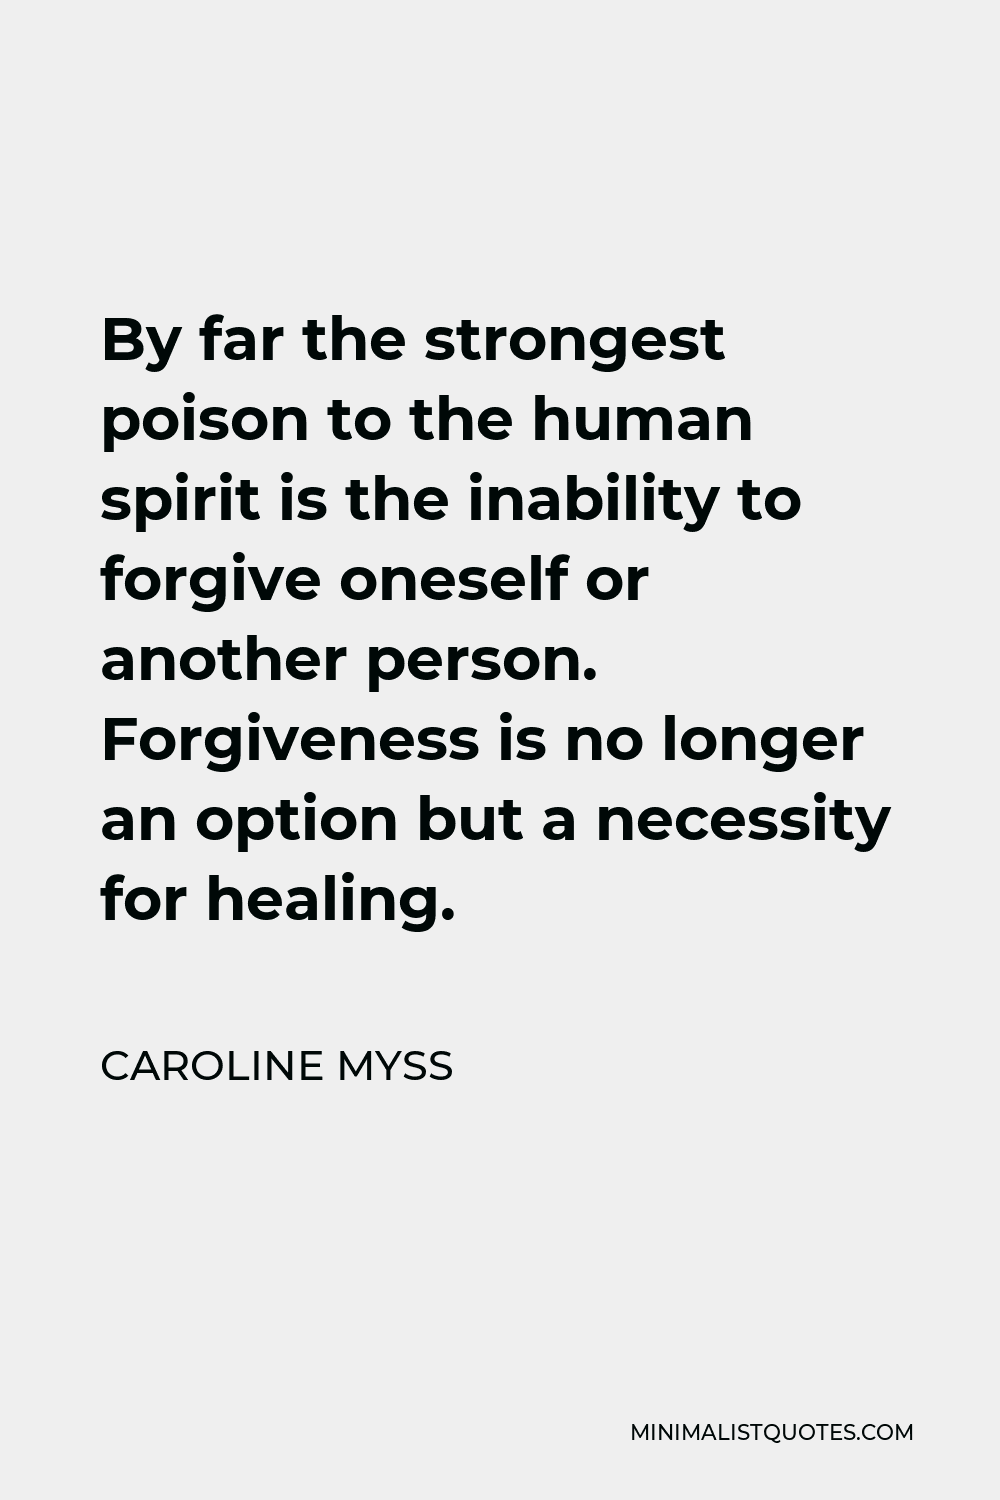 Caroline Myss Quote - By far the strongest poison to the human spirit is the inability to forgive oneself or another person. Forgiveness is no longer an option but a necessity for healing.